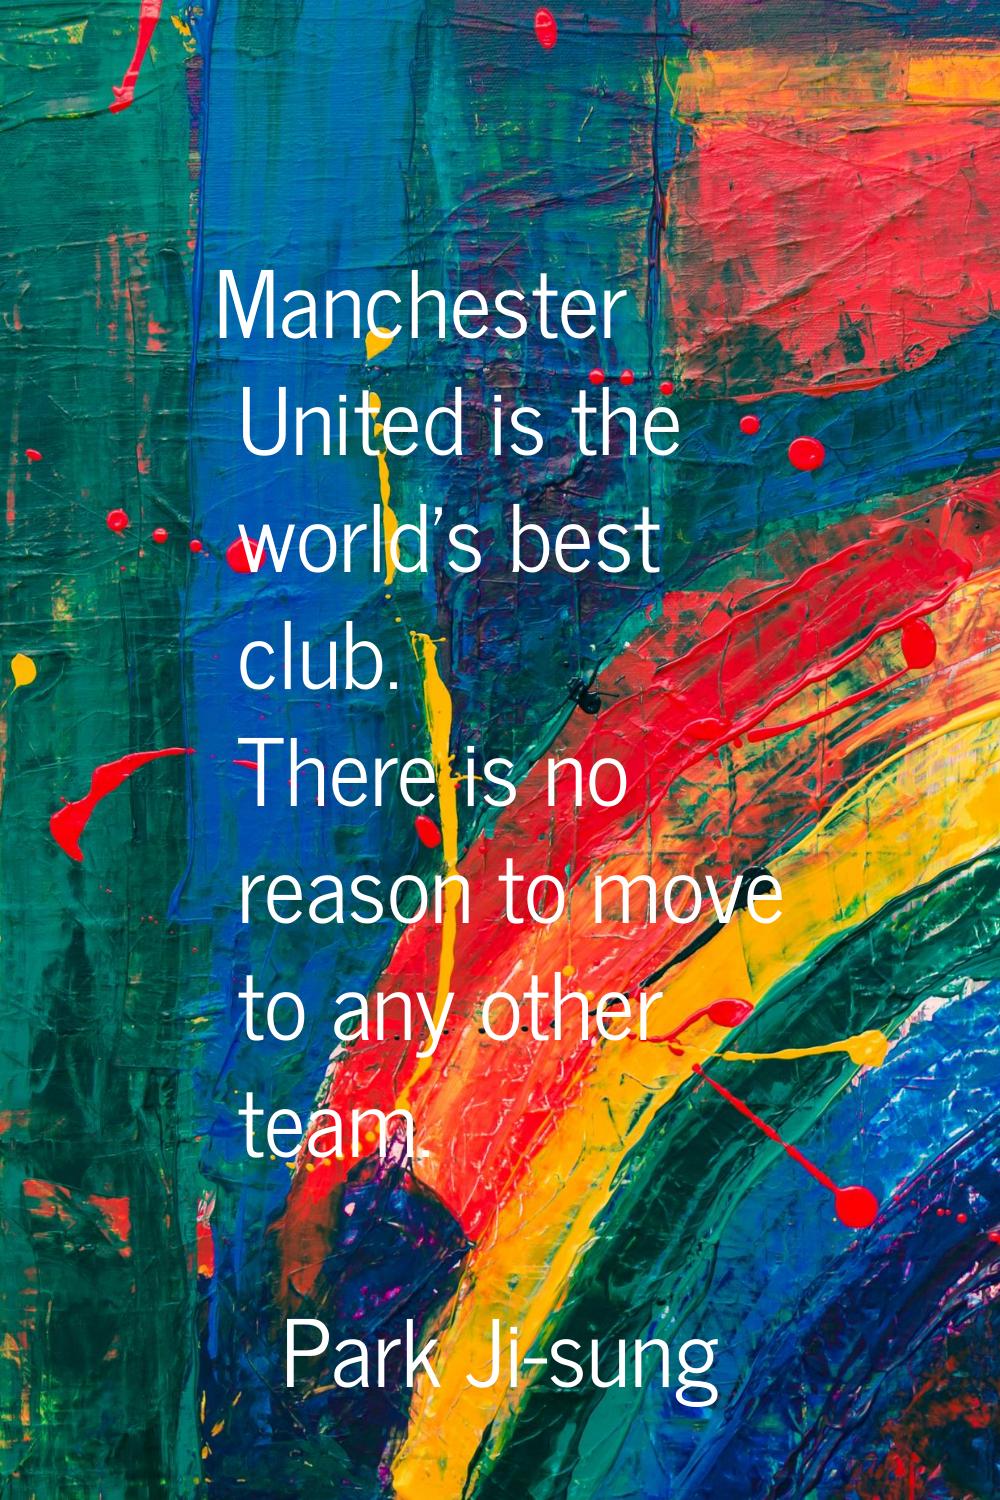 Manchester United is the world's best club. There is no reason to move to any other team.